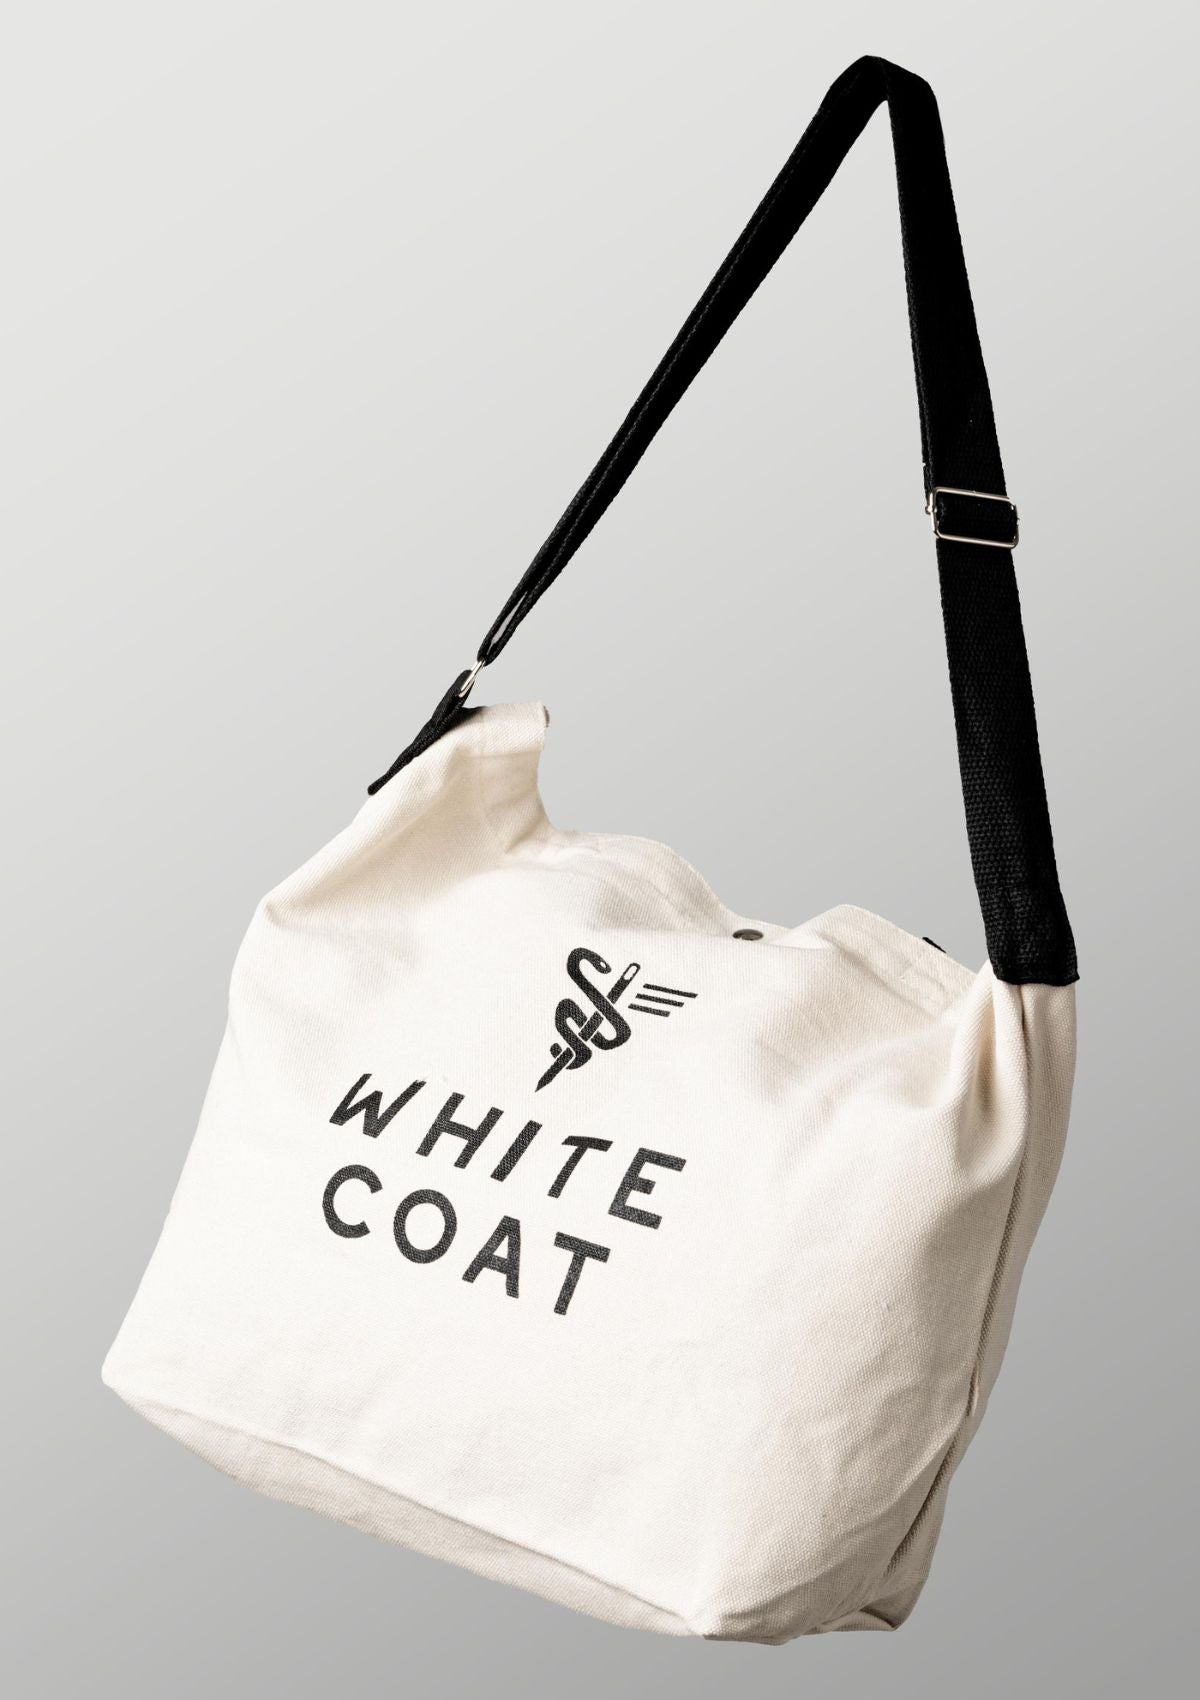 White Coat 24-7 Carry All 24-7 Tote Bag